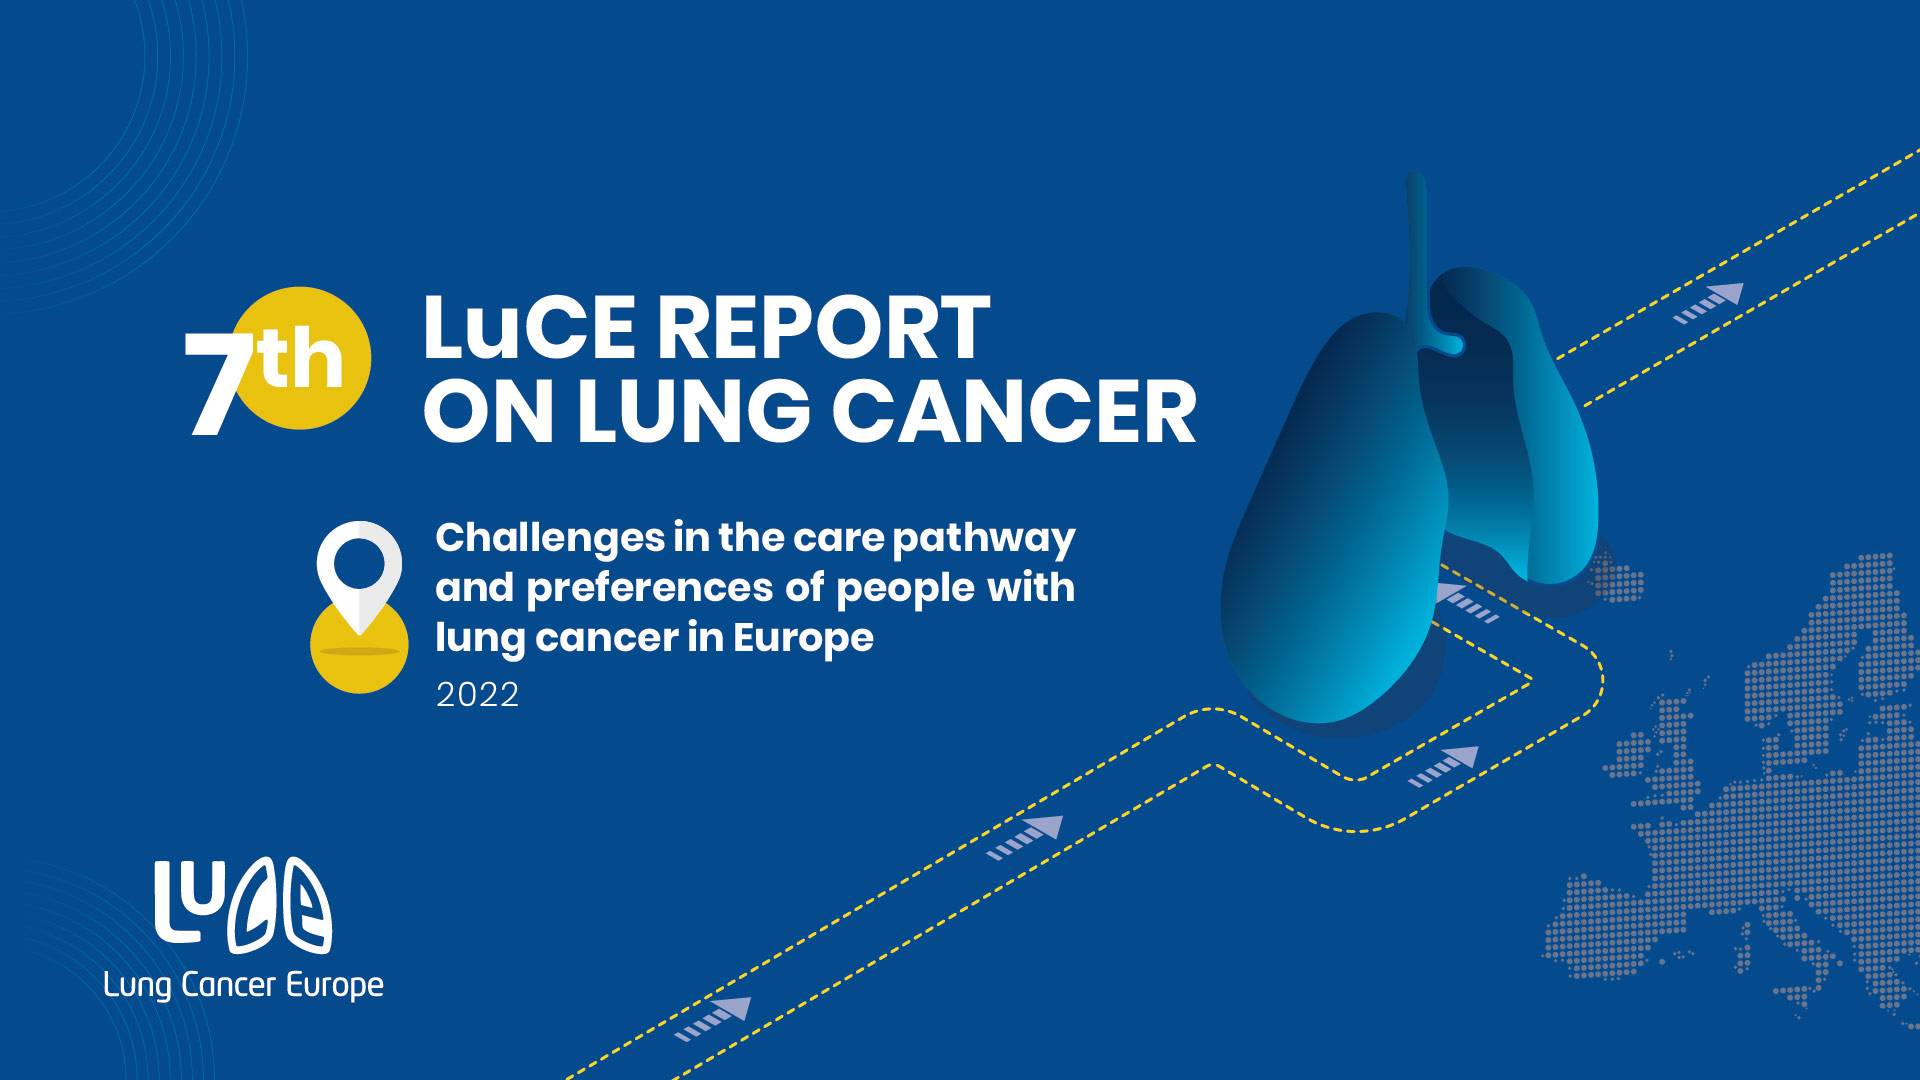 7th Edition of the LuCE Report: Challenges in the care pathway and preferences of people with lung cancer in Europe